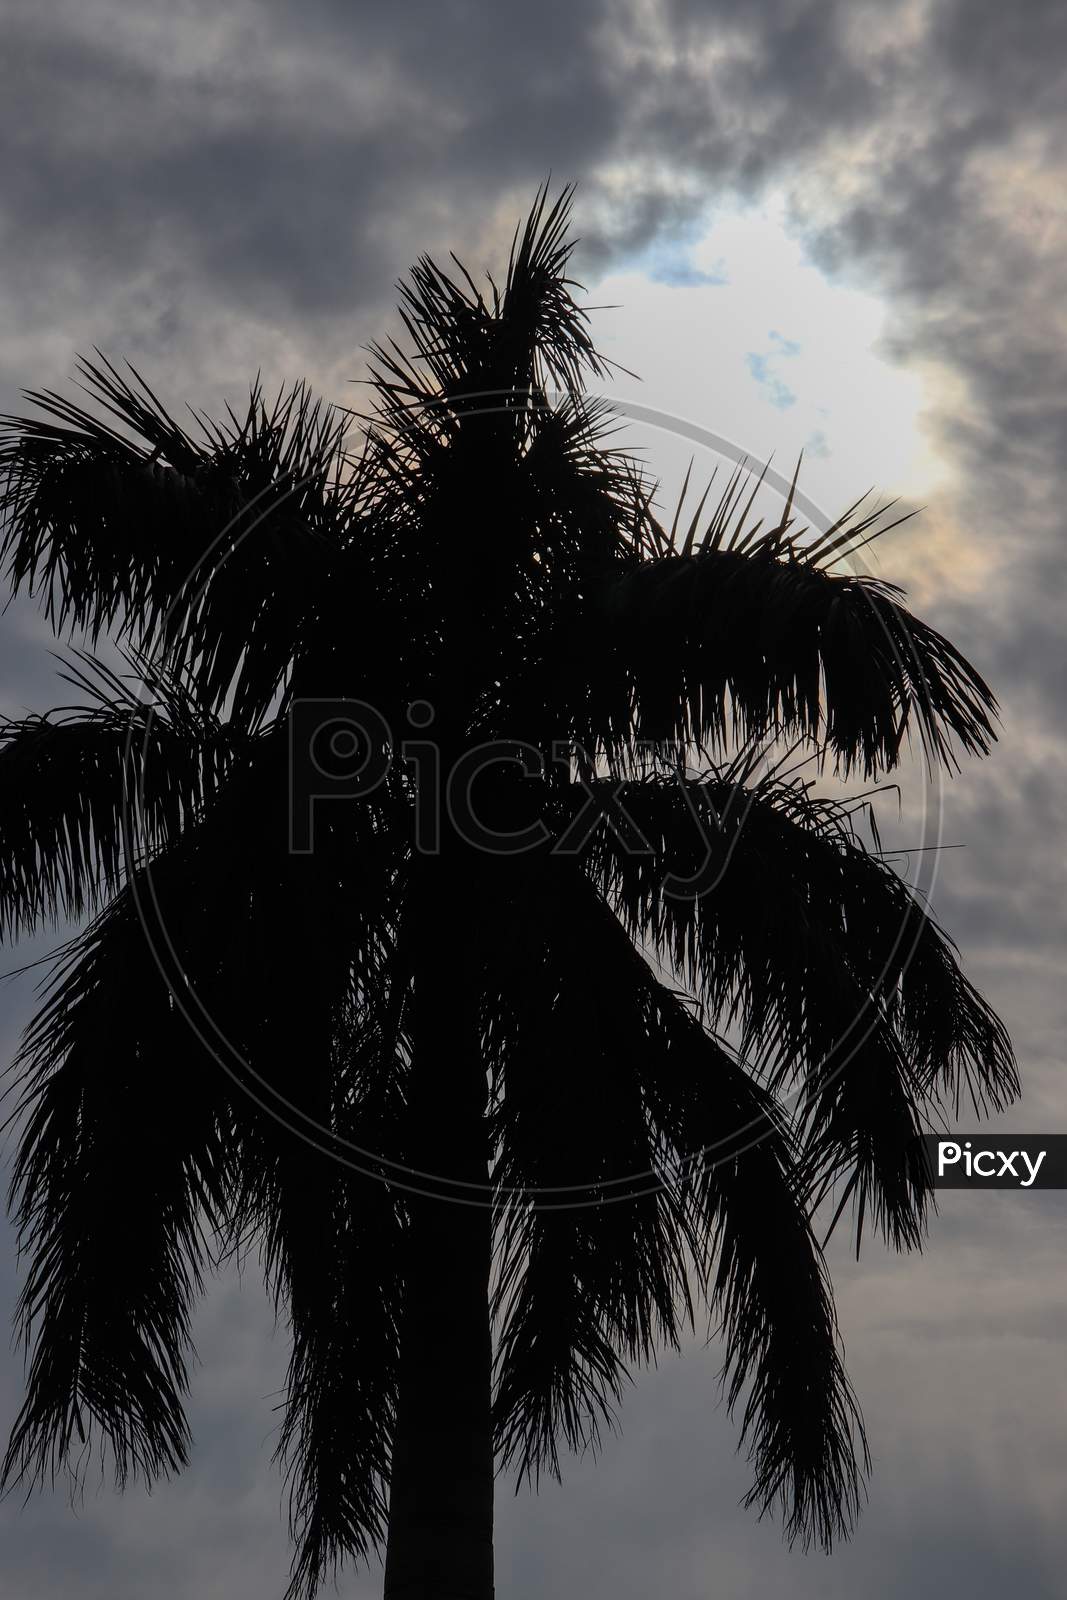 Coconut Tree In Silhouette With Blue Sky In The Background At Pinjore Garden At Ambala-Shimla Highway, Pinjore, Chandigarh, Haryana